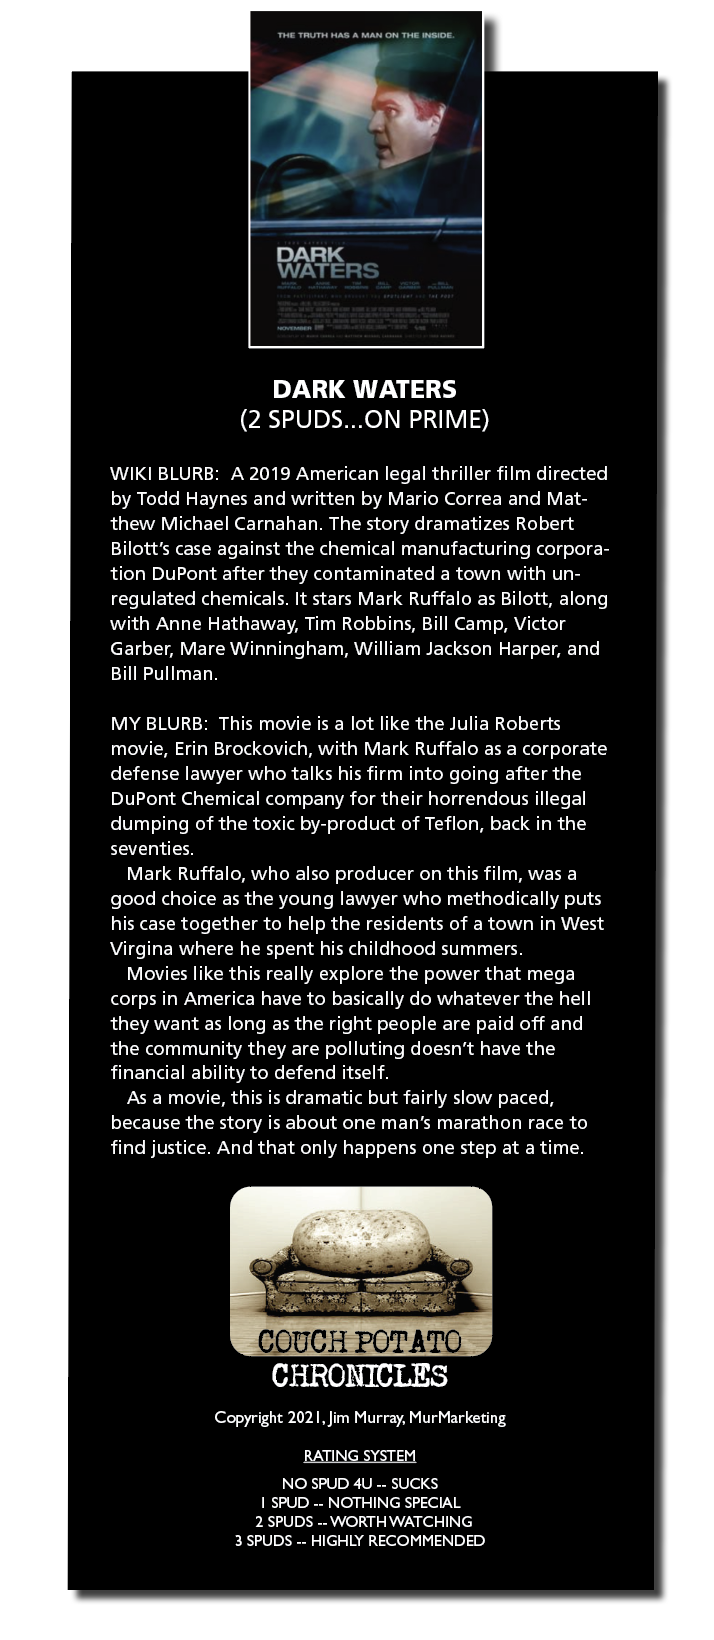 DARK WATERS
(2 SPUDS...ON PRIME)

WIKI BLURB A 2019 American legal thriller film directed
by Todd Haynes and written by Mario Correa and Mat-
thew Michael Carnahan The story dramatizes Robert
Bilott's case against the chemical manufacturing corpora-
tion DuPont after they contaminated a town with un-
regulated chemicals It stars Mark Rutfalo as Bilott, along
with Anne Hathaway, Tim Robbins, Bill Camp, Victor
[FA ER Te LER ETE SSR Evert AeTat|
Bill Pullman

MY BLURB This movie 1s a lot like the Juha Roberts
movie, Enn Brockovich, with Mark Ruffalo as a corporate
defense lawyer who talks his firm into going after the
DuPont Chemical company for their horrendous illegal
BT RR Rd RA CS a Te Sh
seventies

Mark Ruffalo, who also producer on this film, was a
good choice as the young lawyer who methodically puts
his case together to help the residents of a town in West
NR LE ATR A Gere RTT

A RR ERT ra Lr grey
corps in America have to basically do whatever the hell
they want as long as the right people are paid off and
the community they are polluting doesn’t have the
financial ability to defend itself

As a movie, this 1s dramatic but fairly slow paced,
because the story 1s about one man’s marathon race to
Tr LR Rr Ru

OUCH POTATC
CHRONICLES

Copyright 2021. Jim Murray, MurMarkeung

RATING SYSTEM

[RV PVT
1 SPUD .. NOTHING SPECIAL
2 SPUDS .. WORTH WATCHING
3 SPUDS .. HIGHLY RECOMMENDED